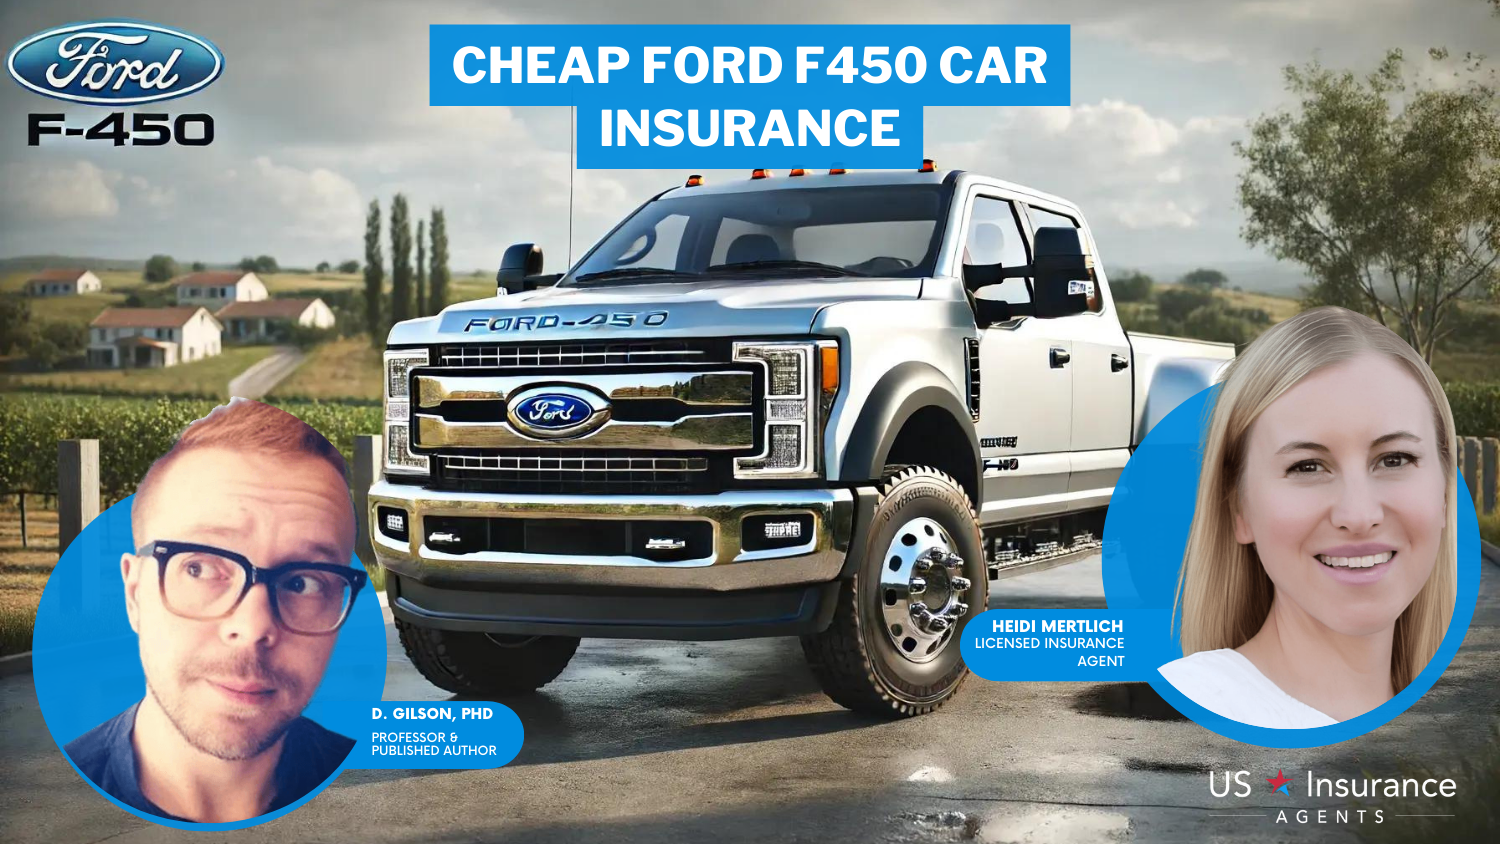 Cheap Ford F450 Car Insurance: USAA, Safeco, and AAA